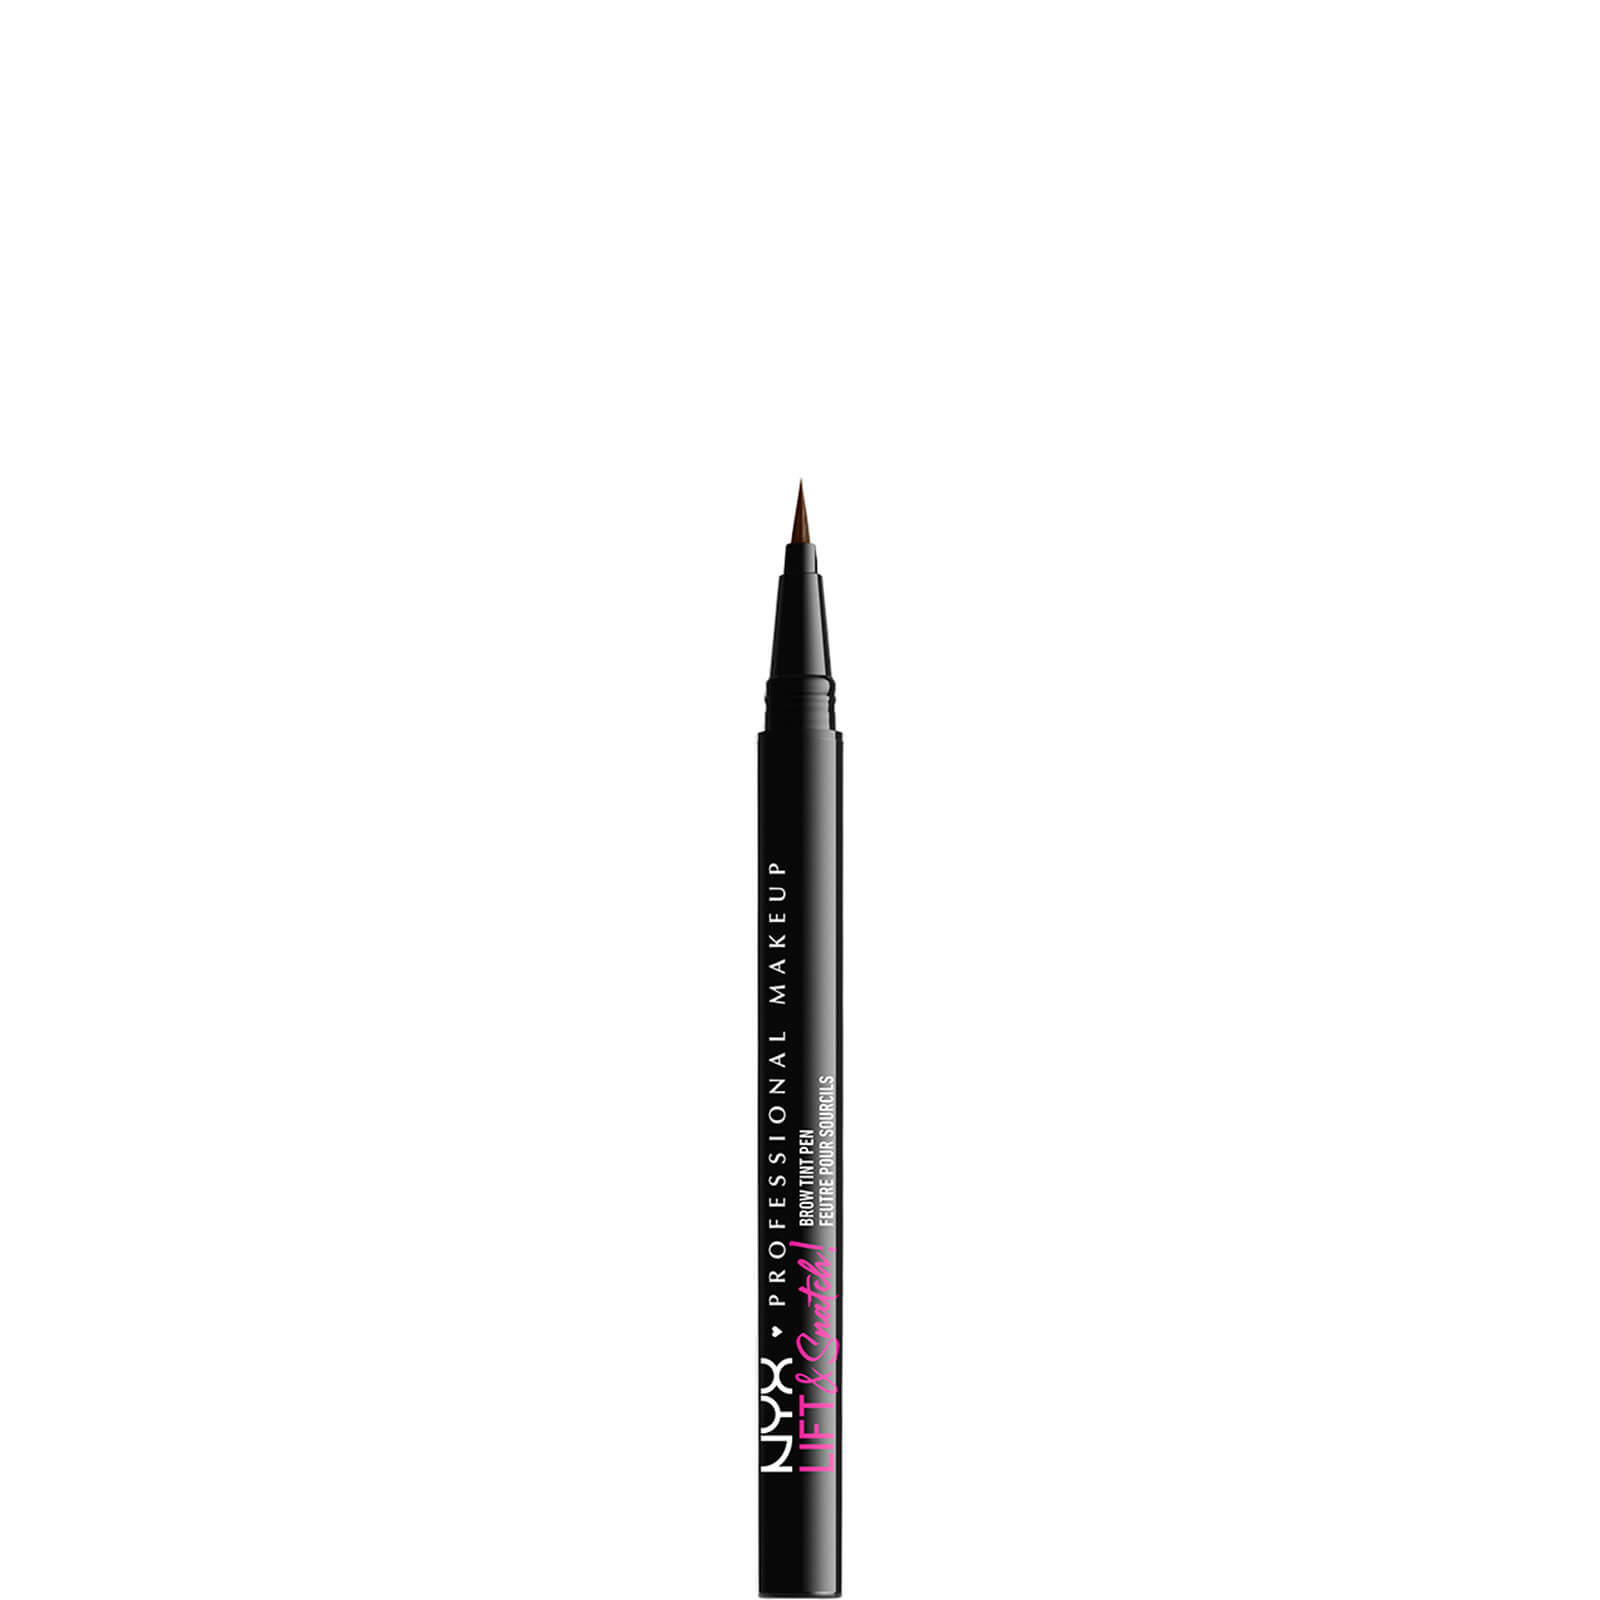 NYX Professional Makeup Lift and Snatch Brow Tint Pen 3g (Various Shades) - Espresso von NYX Professional Makeup